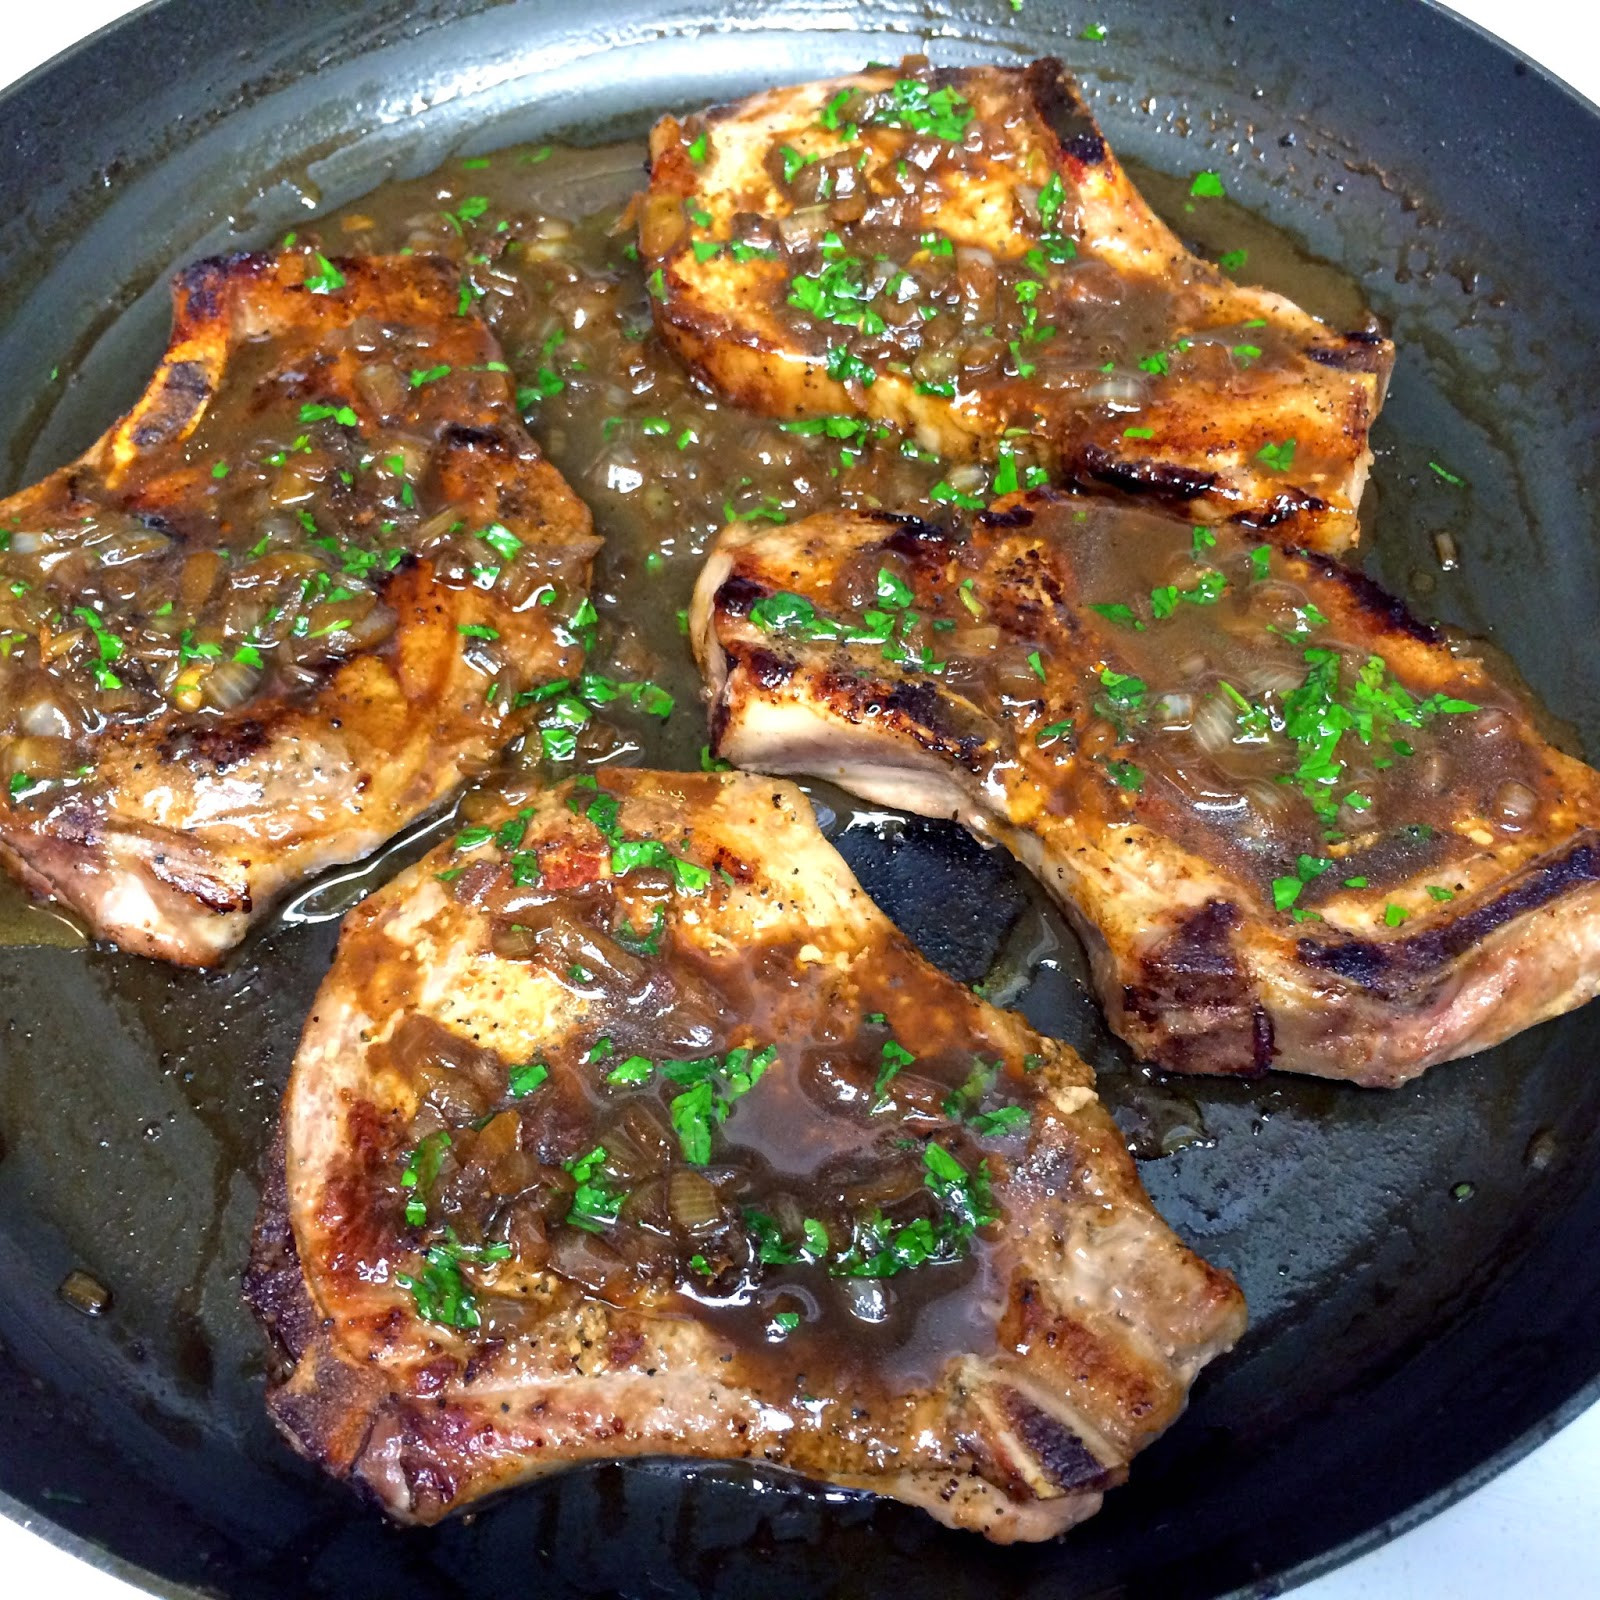 Pork Chops In The Oven
 Oven Roasted Pan Seared Pork Chops with Cilantro Butter